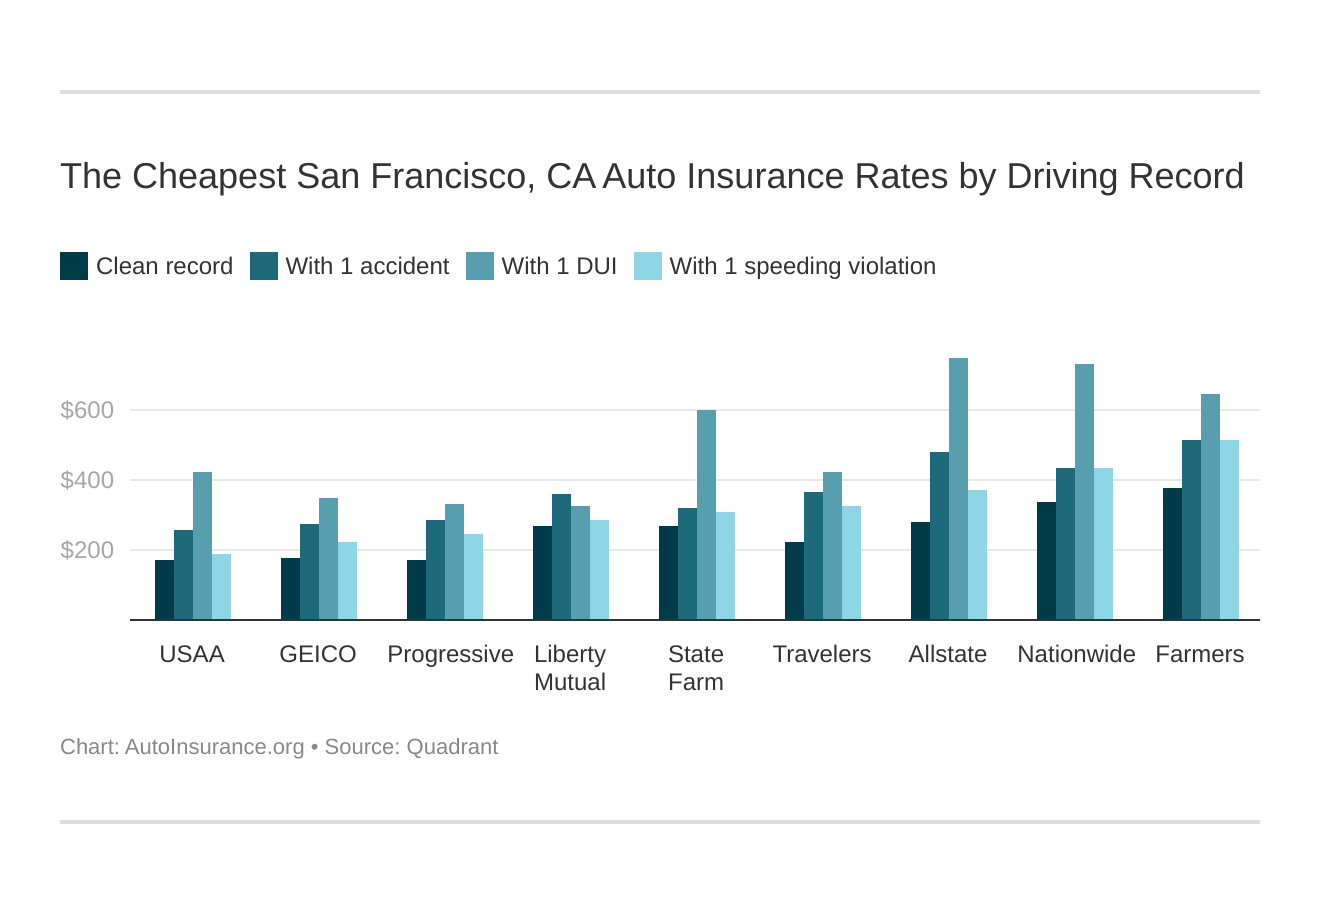 The Cheapest San Francisco, CA Auto Insurance Rates by Driving Record